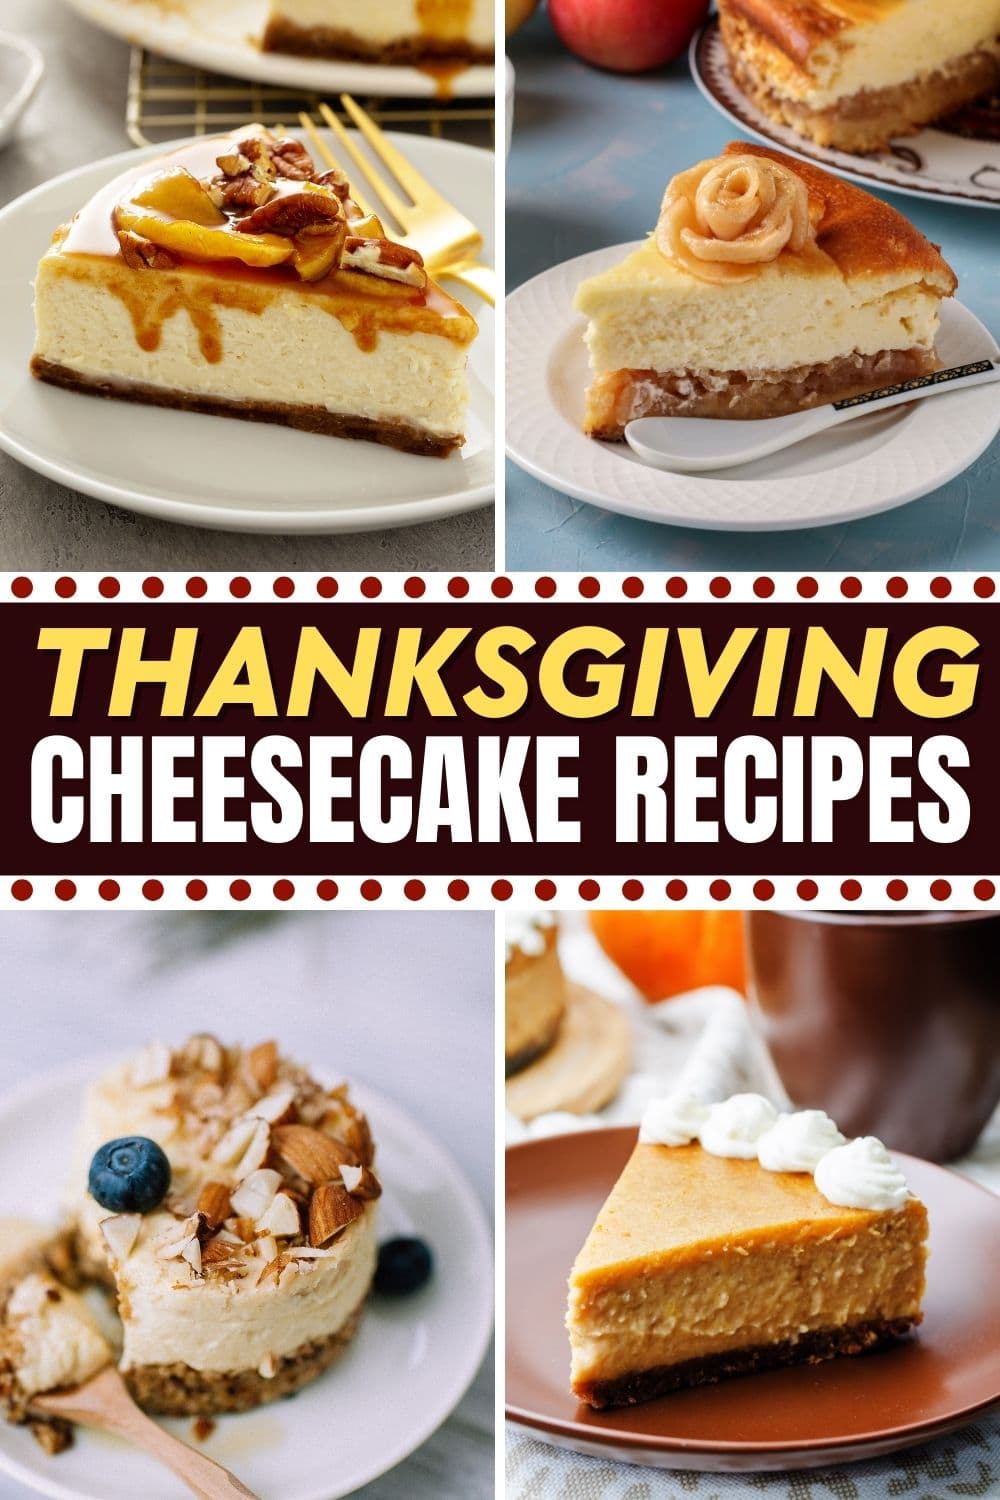 24 Thanksgiving Cheesecake Recipes - Insanely Good